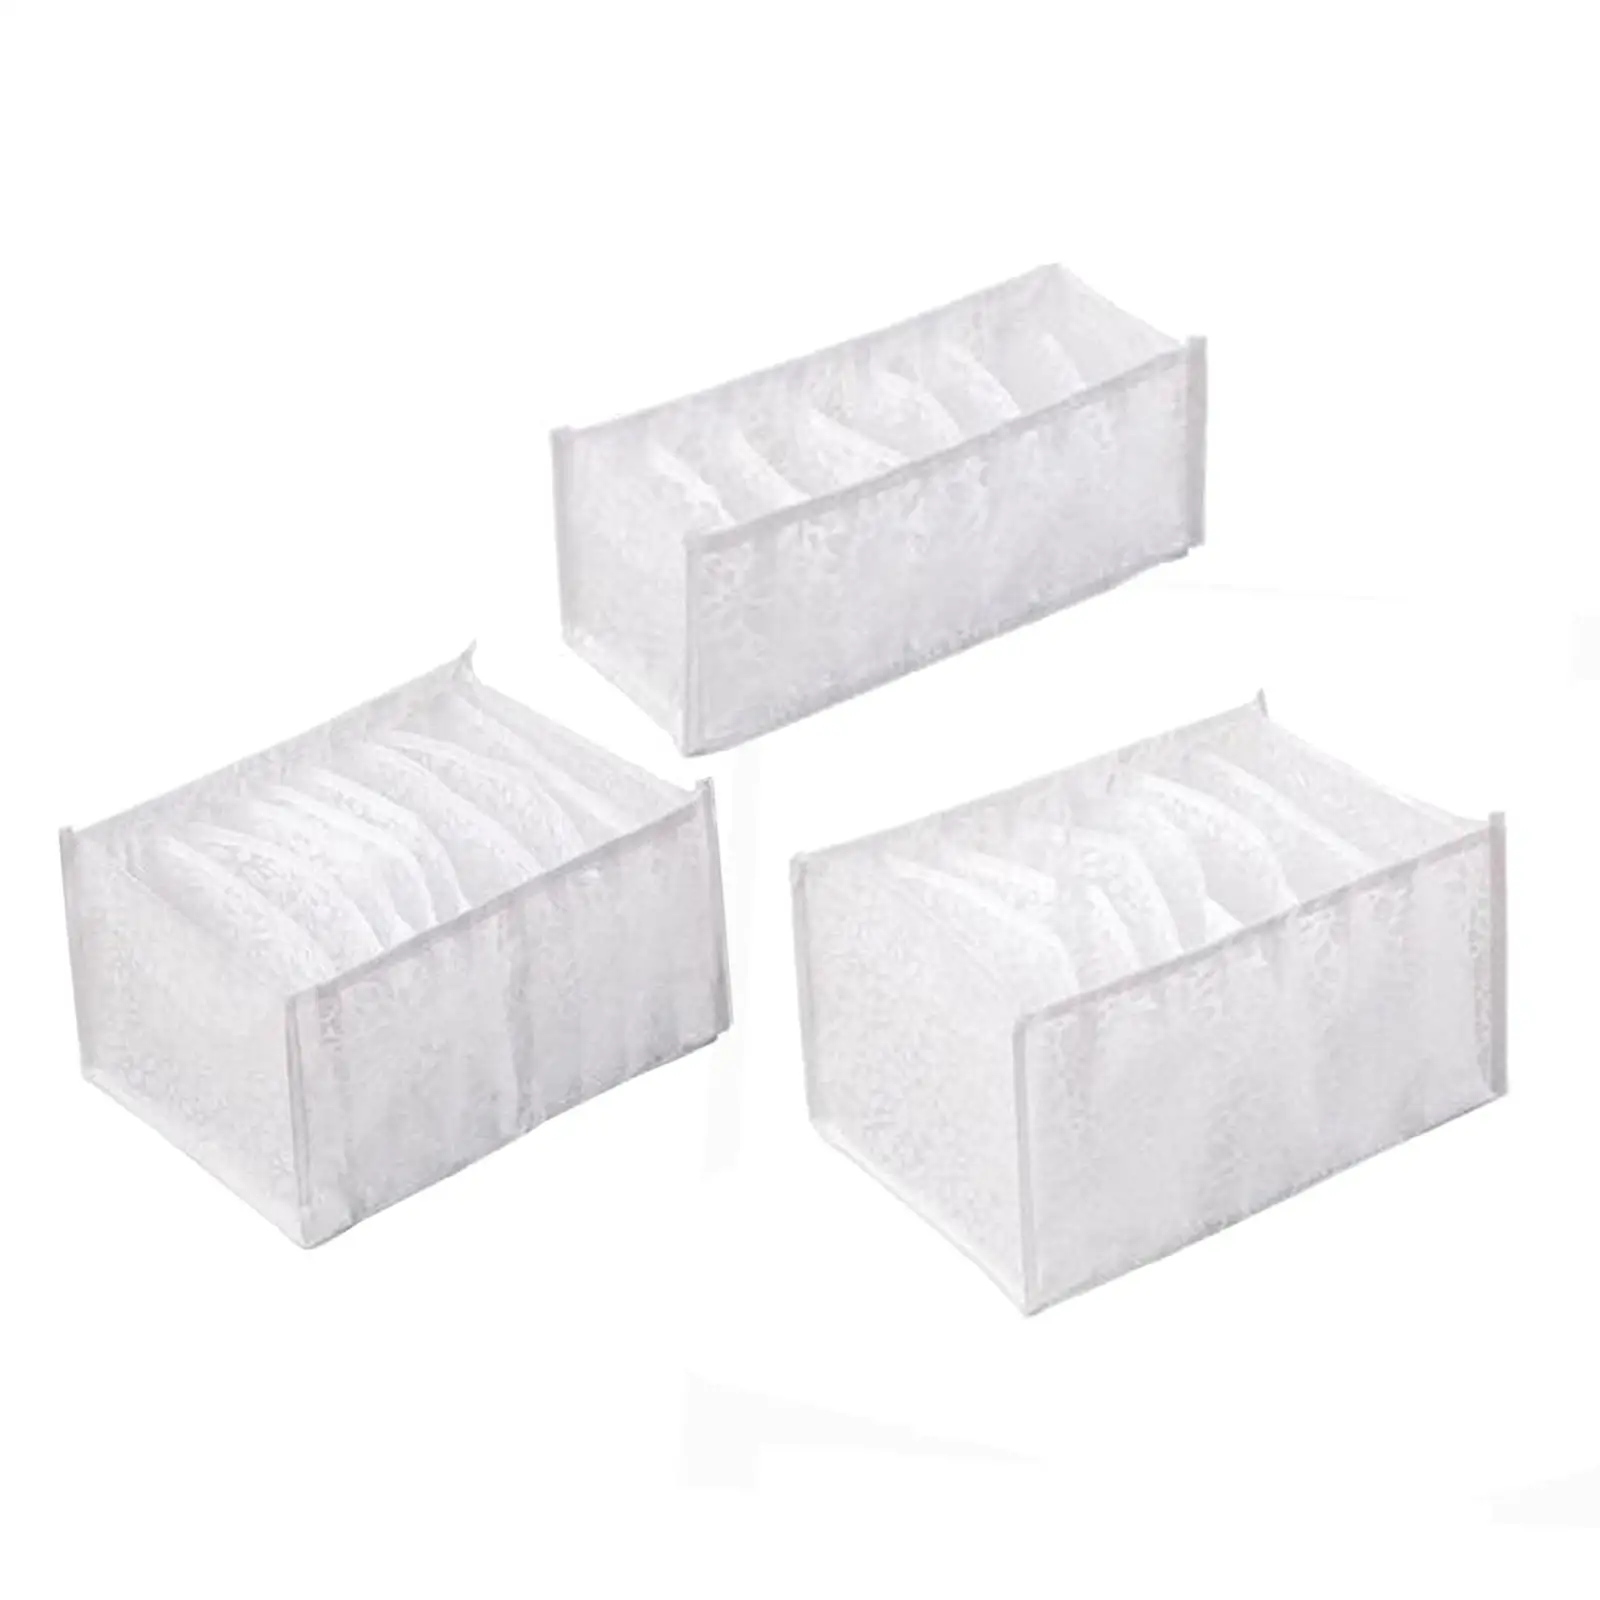 Clothes Storage Boxes with Compartments Washable Stackable Wardrobe Clothes Organizer for Socks Trousers Underwear Bra Pants